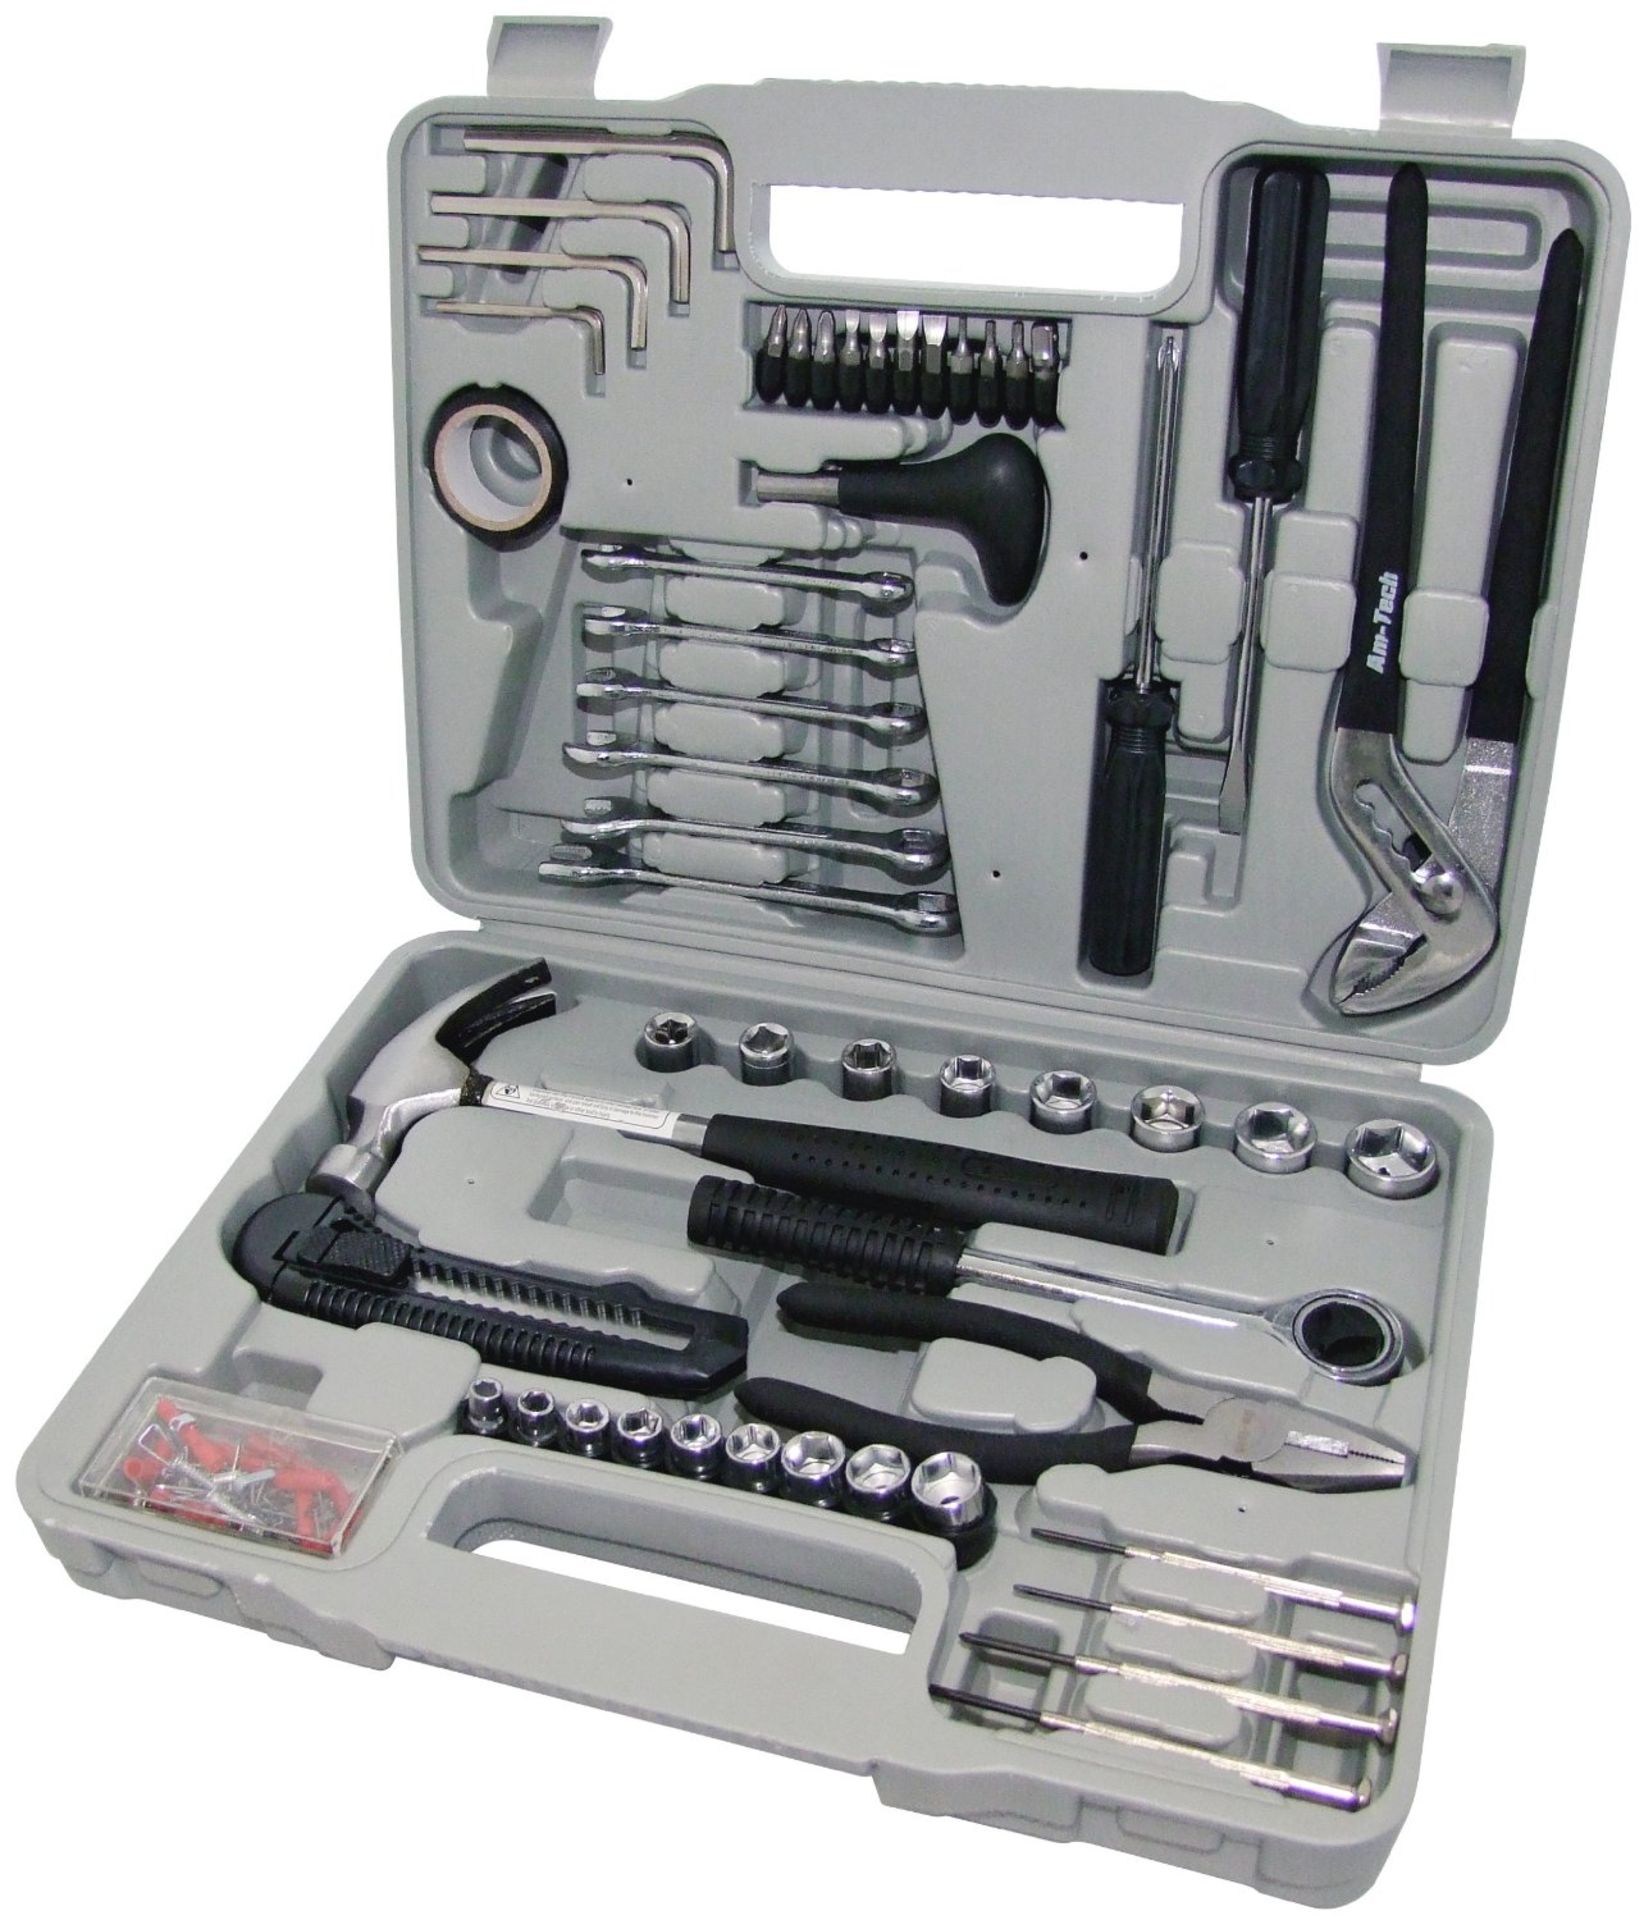 V Brand New 141 Piece Household Tool Kit Includes Screwdivers, Sockets Hex Keys, Wrenches,